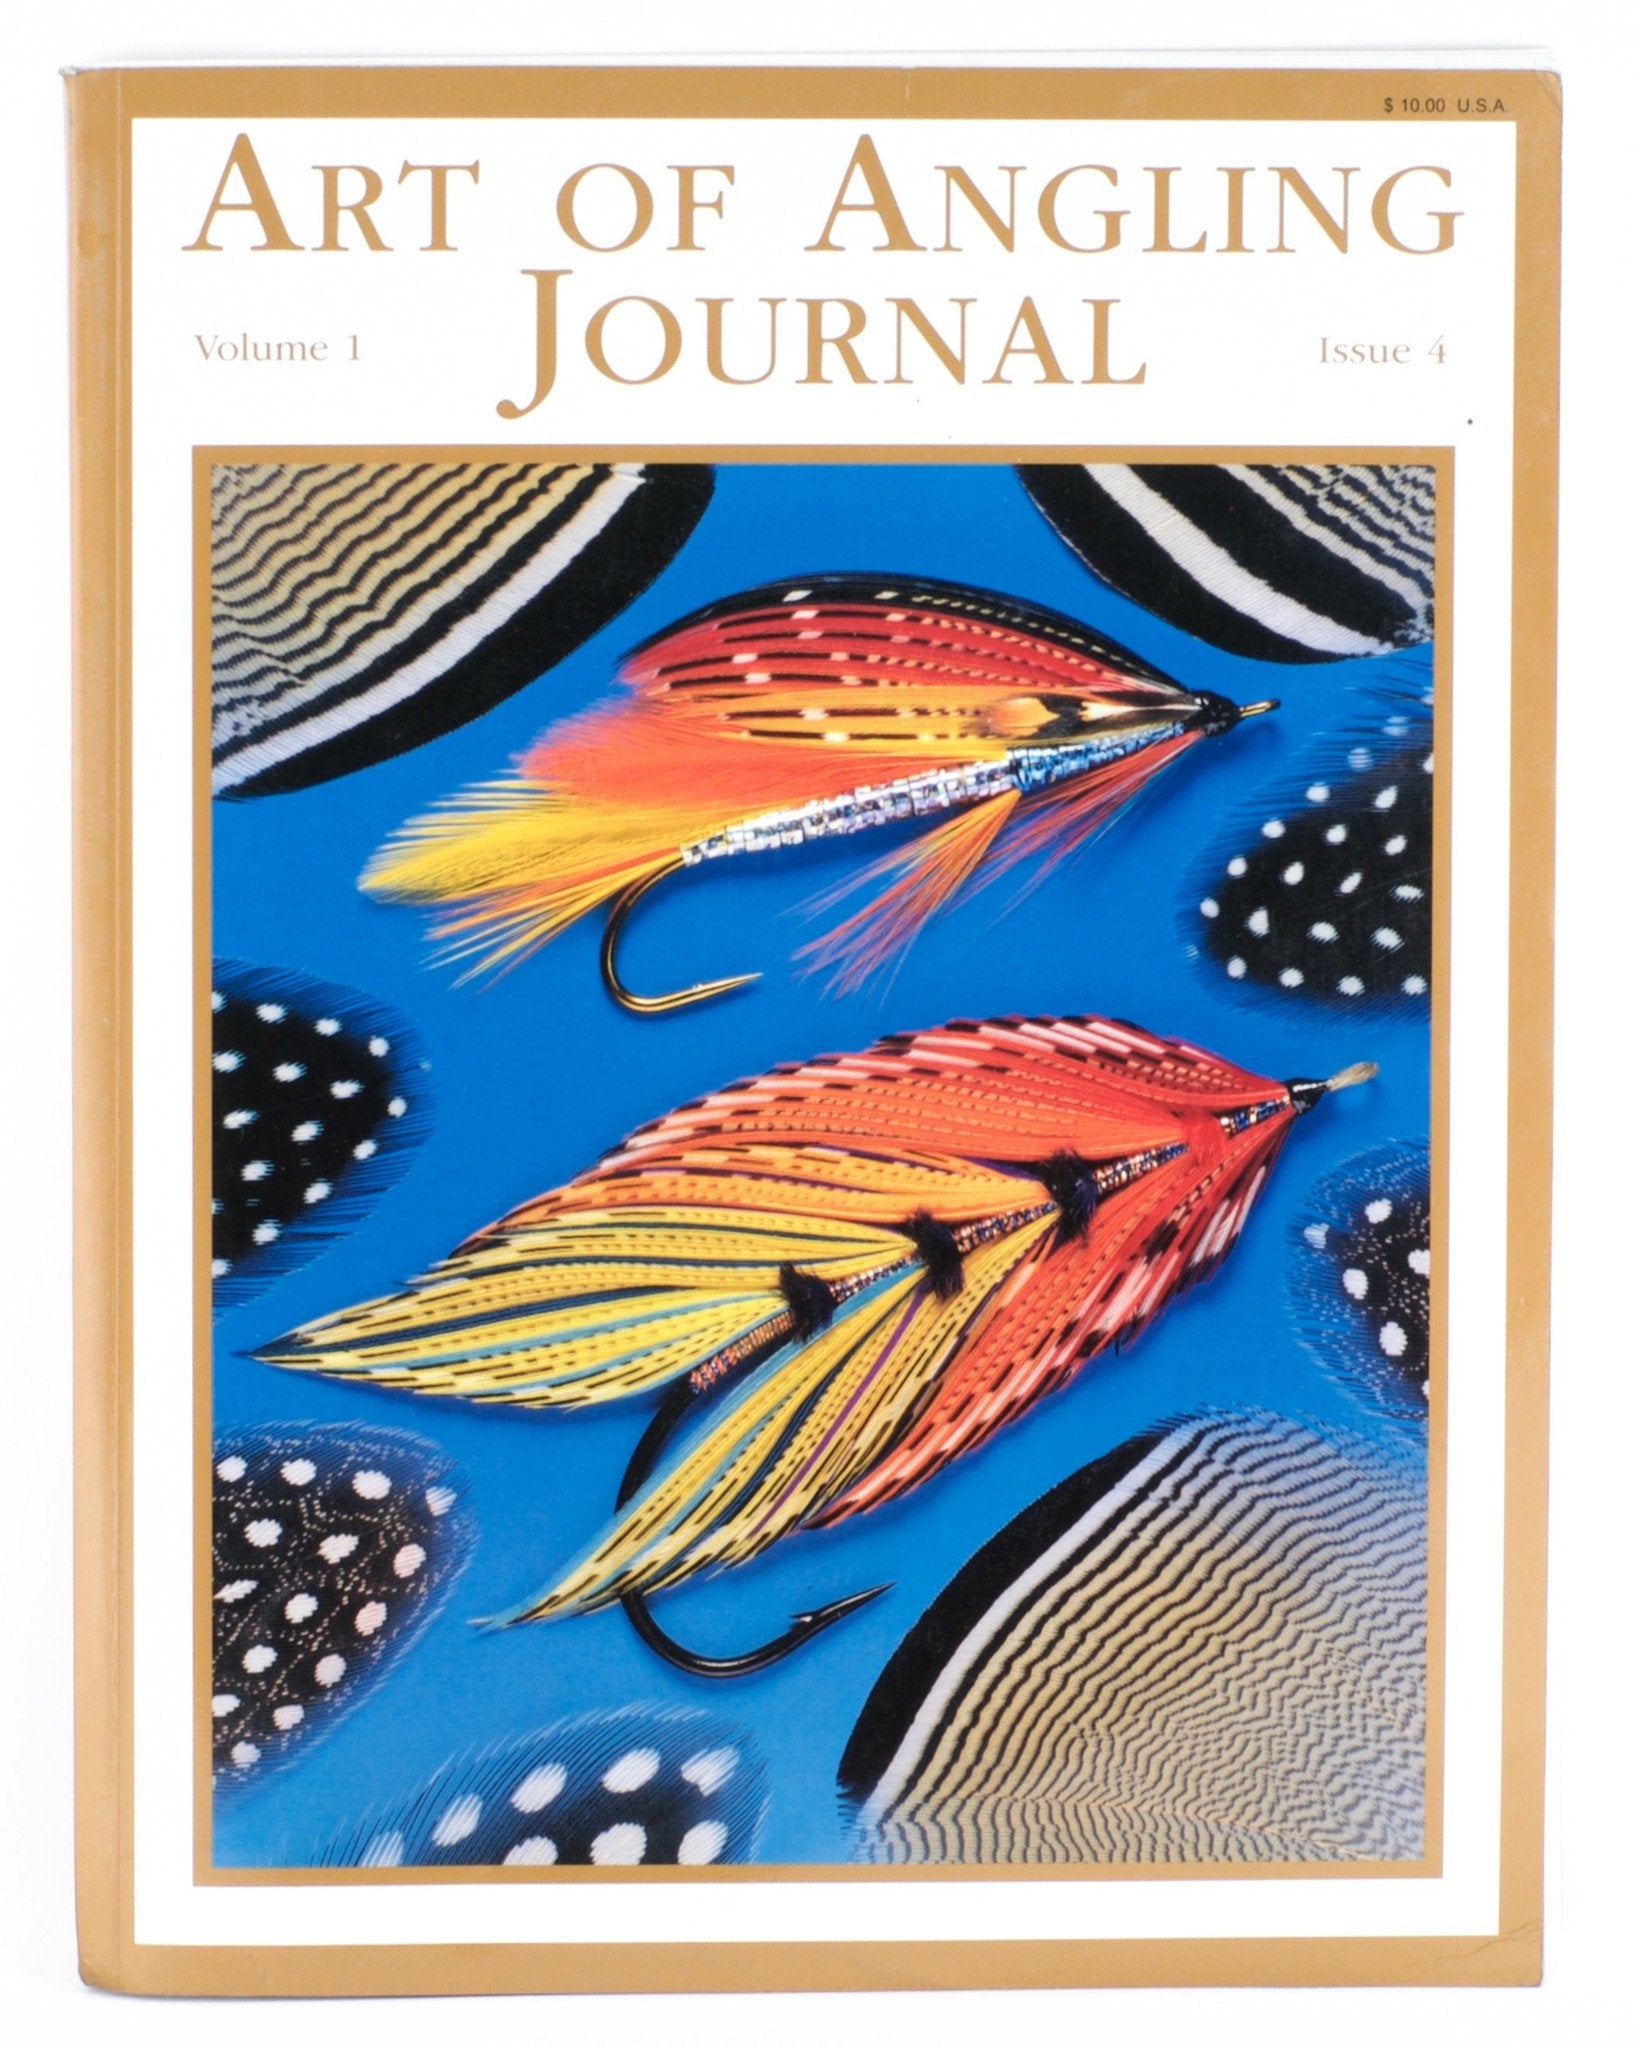 Art of Angling Journal - Volume 1 Issue 4 